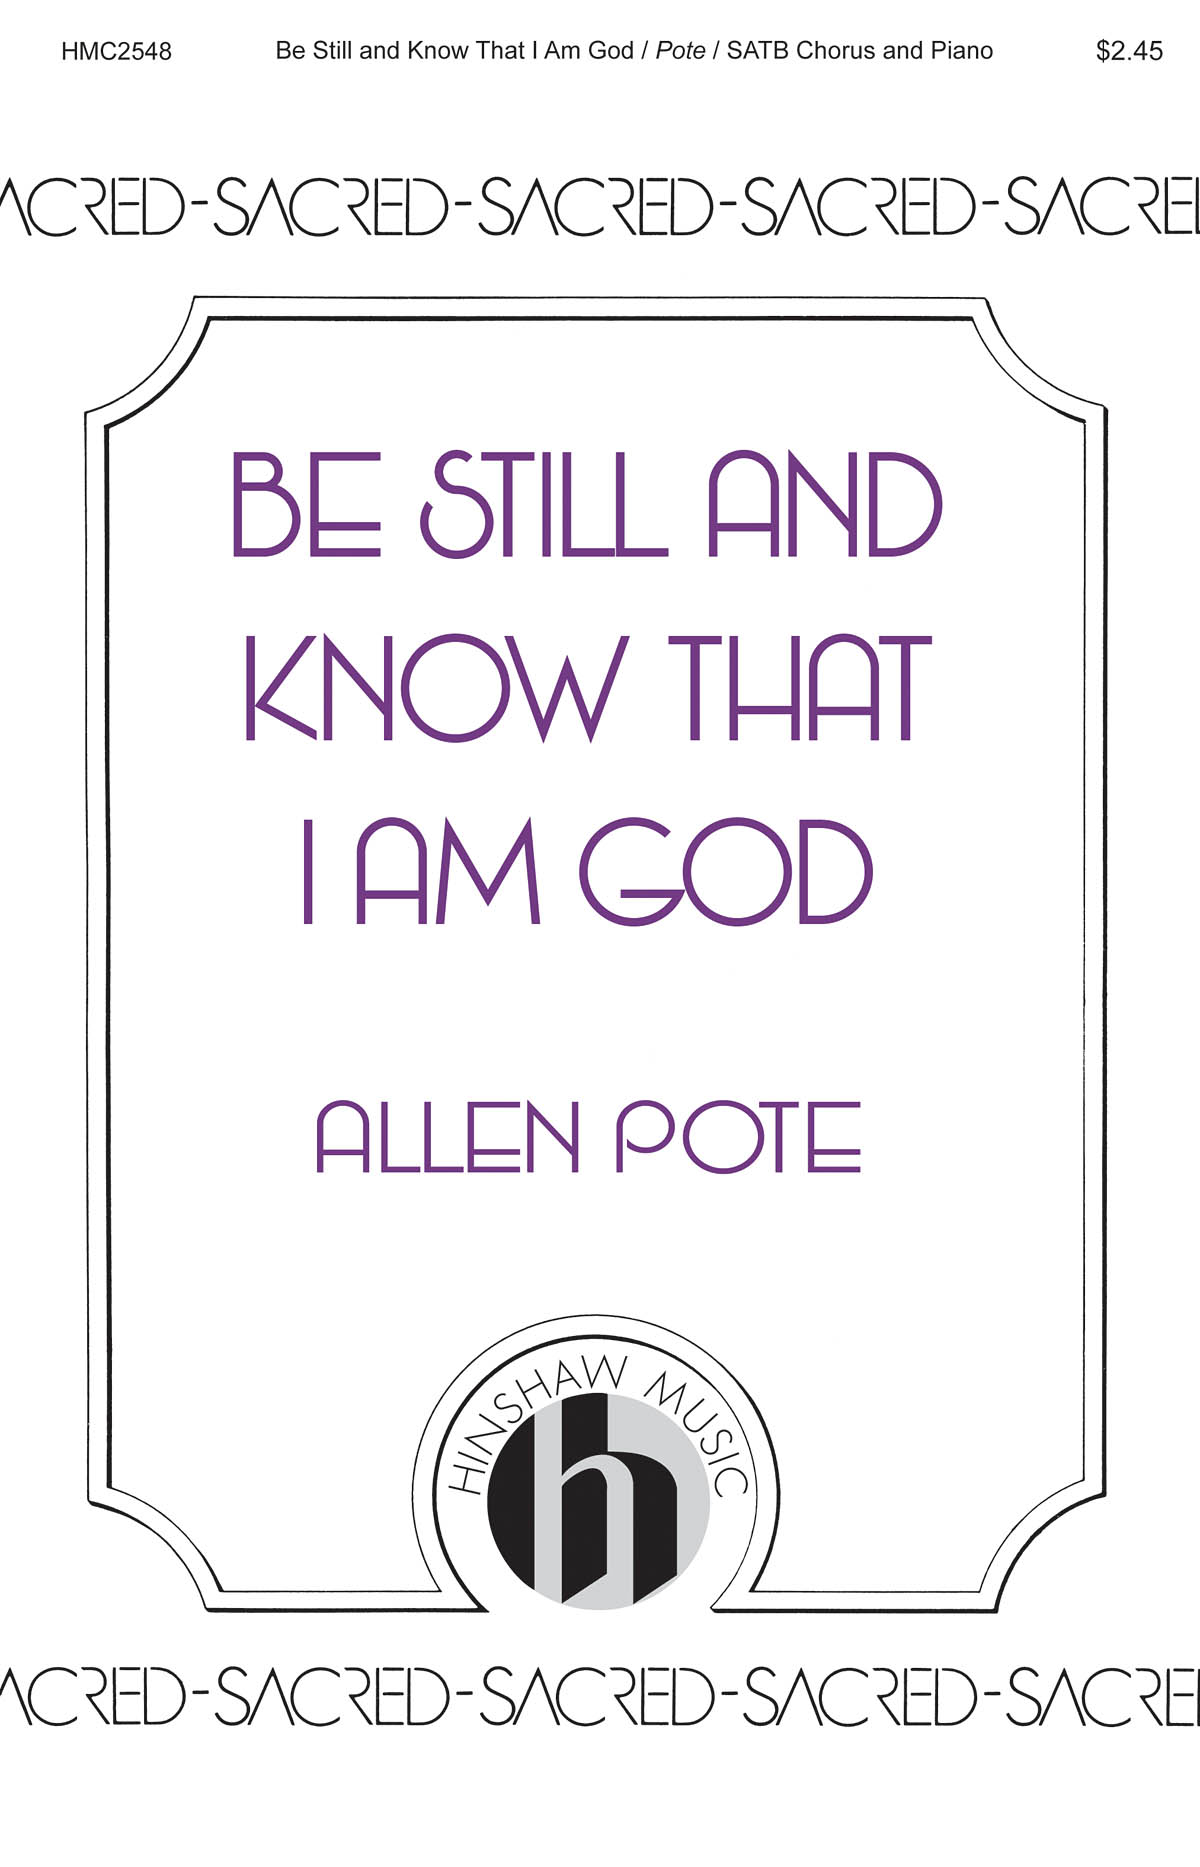 Allen Pote: Be Still and Know That I Am God: Mixed Choir a Cappella: Vocal Score